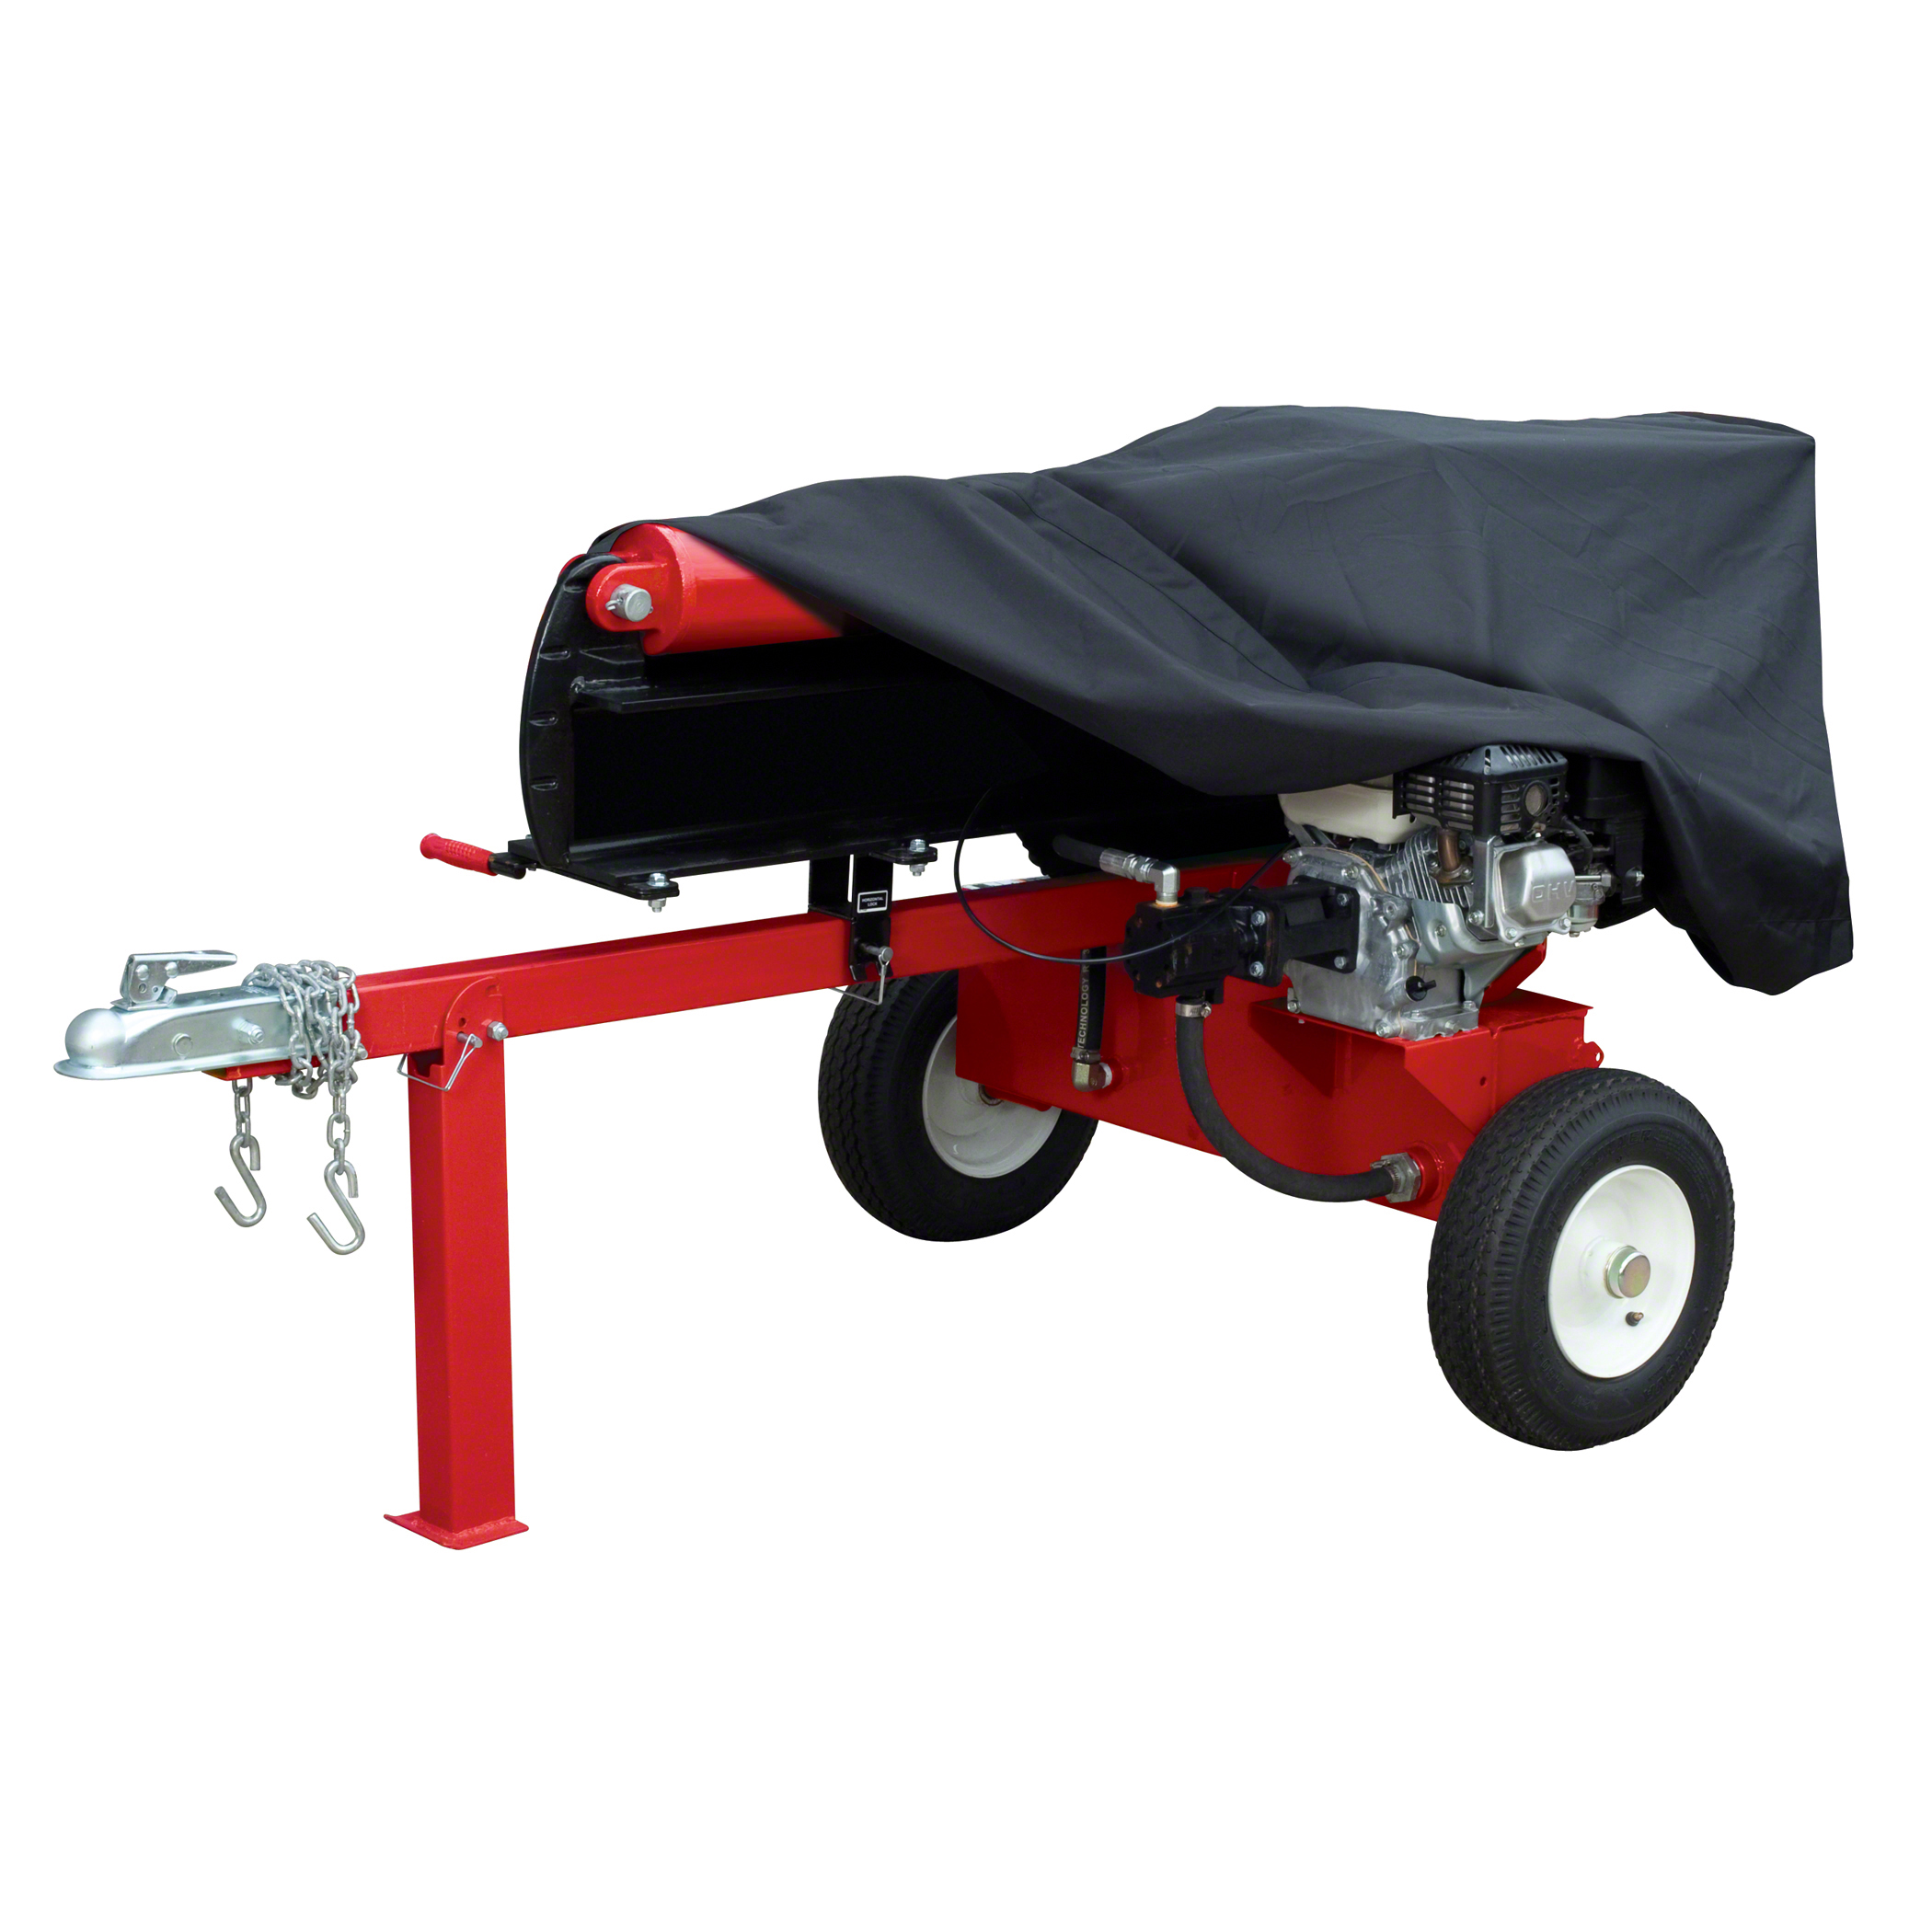 Classic Accessories Log Splitter Cover - image 1 of 7